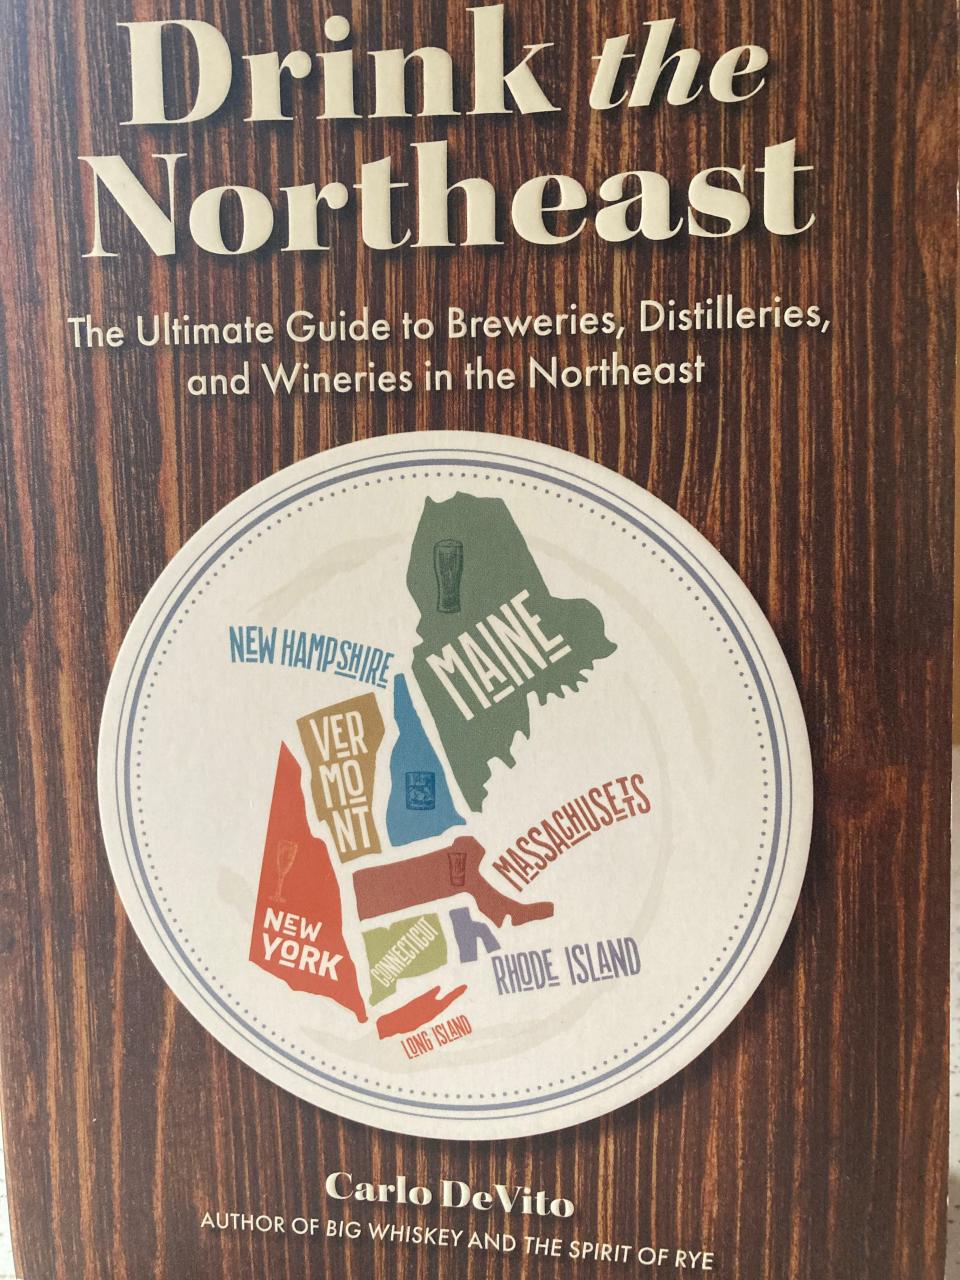 The book "Drink the Northeast" includes profiles of breweries, distilleries and wineries in Vermont.